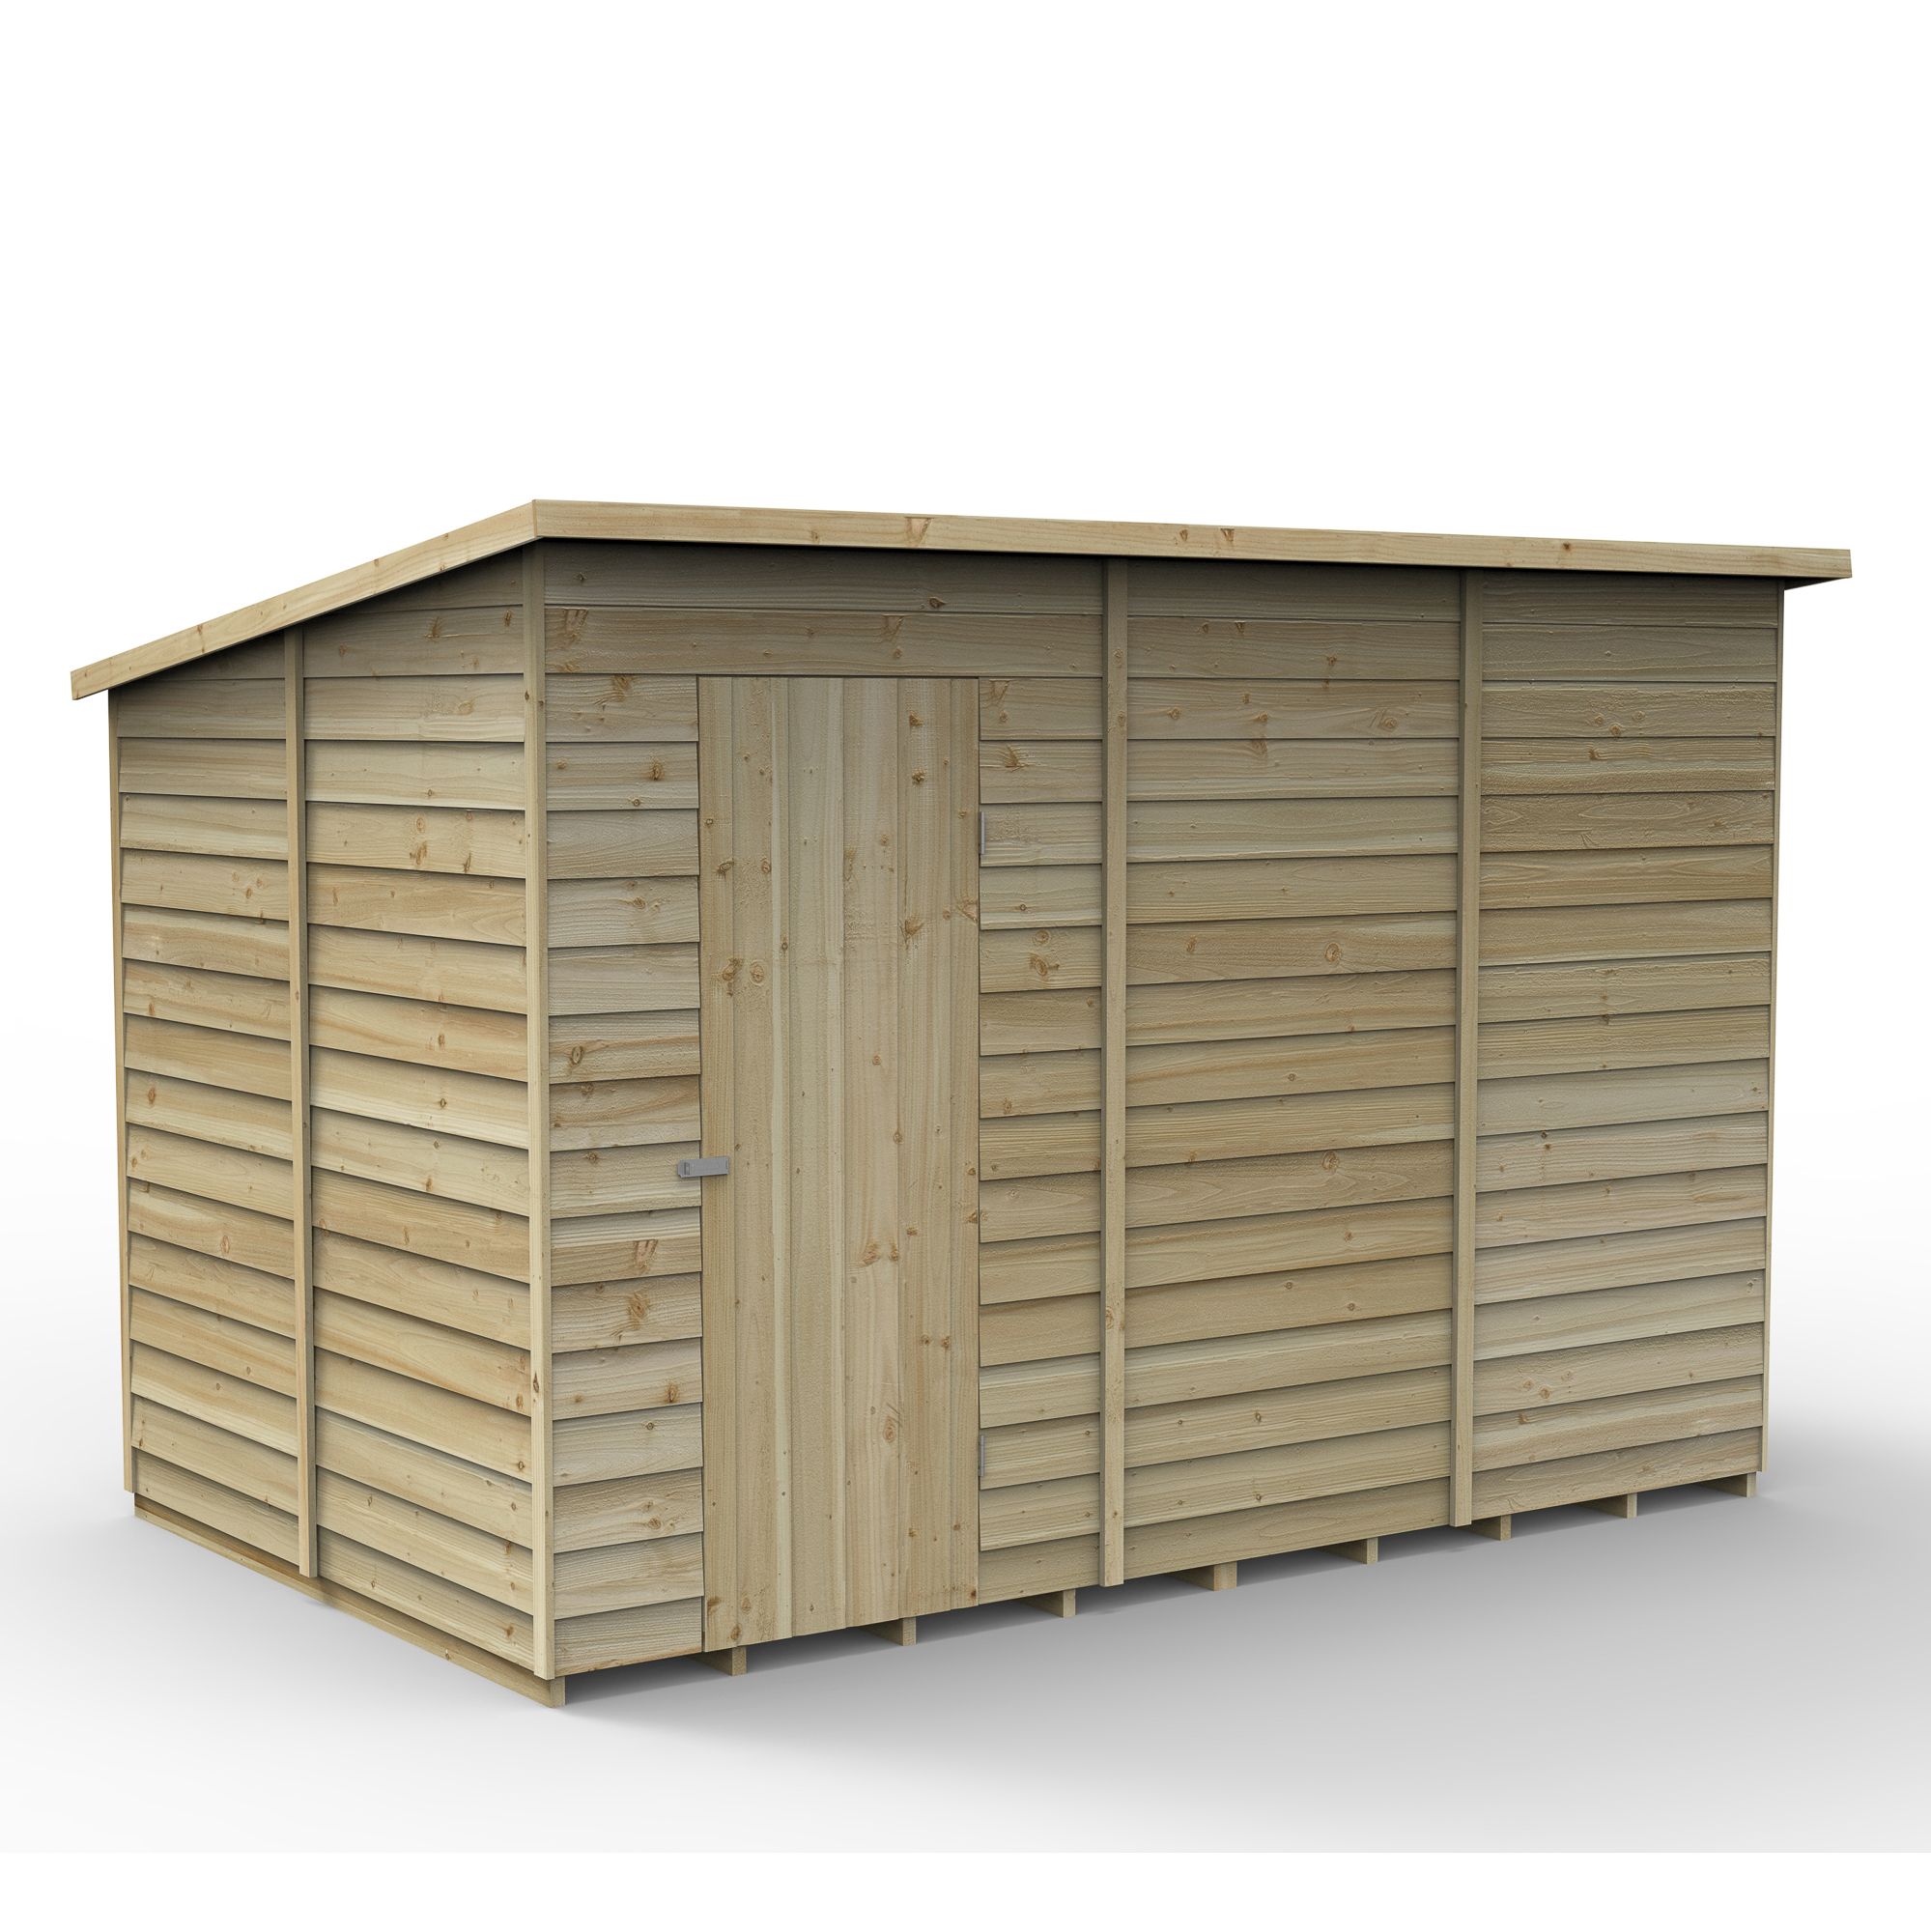 Forest Garden Overlap 10x6 ft Pent Wooden Shed with floor (Base included)